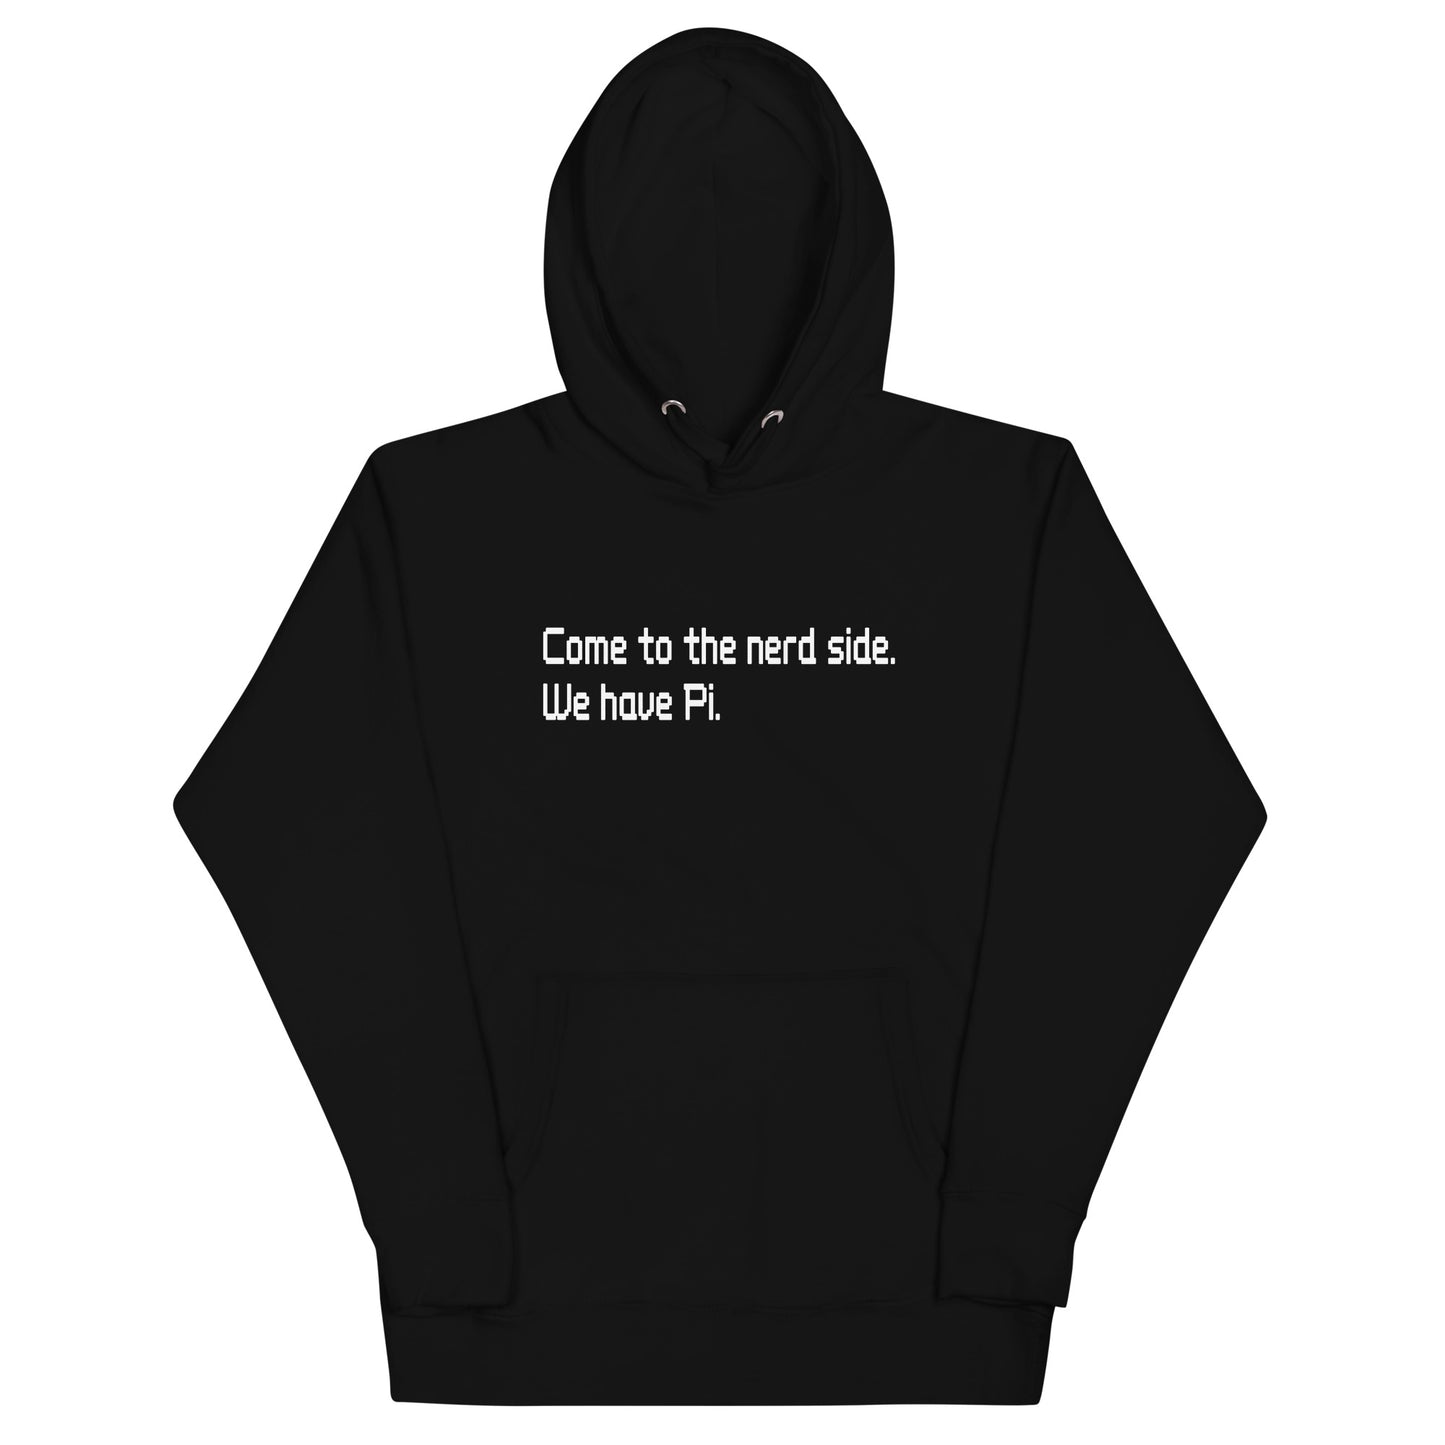 Come To The Nerd Side. We Have Pi. Unisex Hoodie